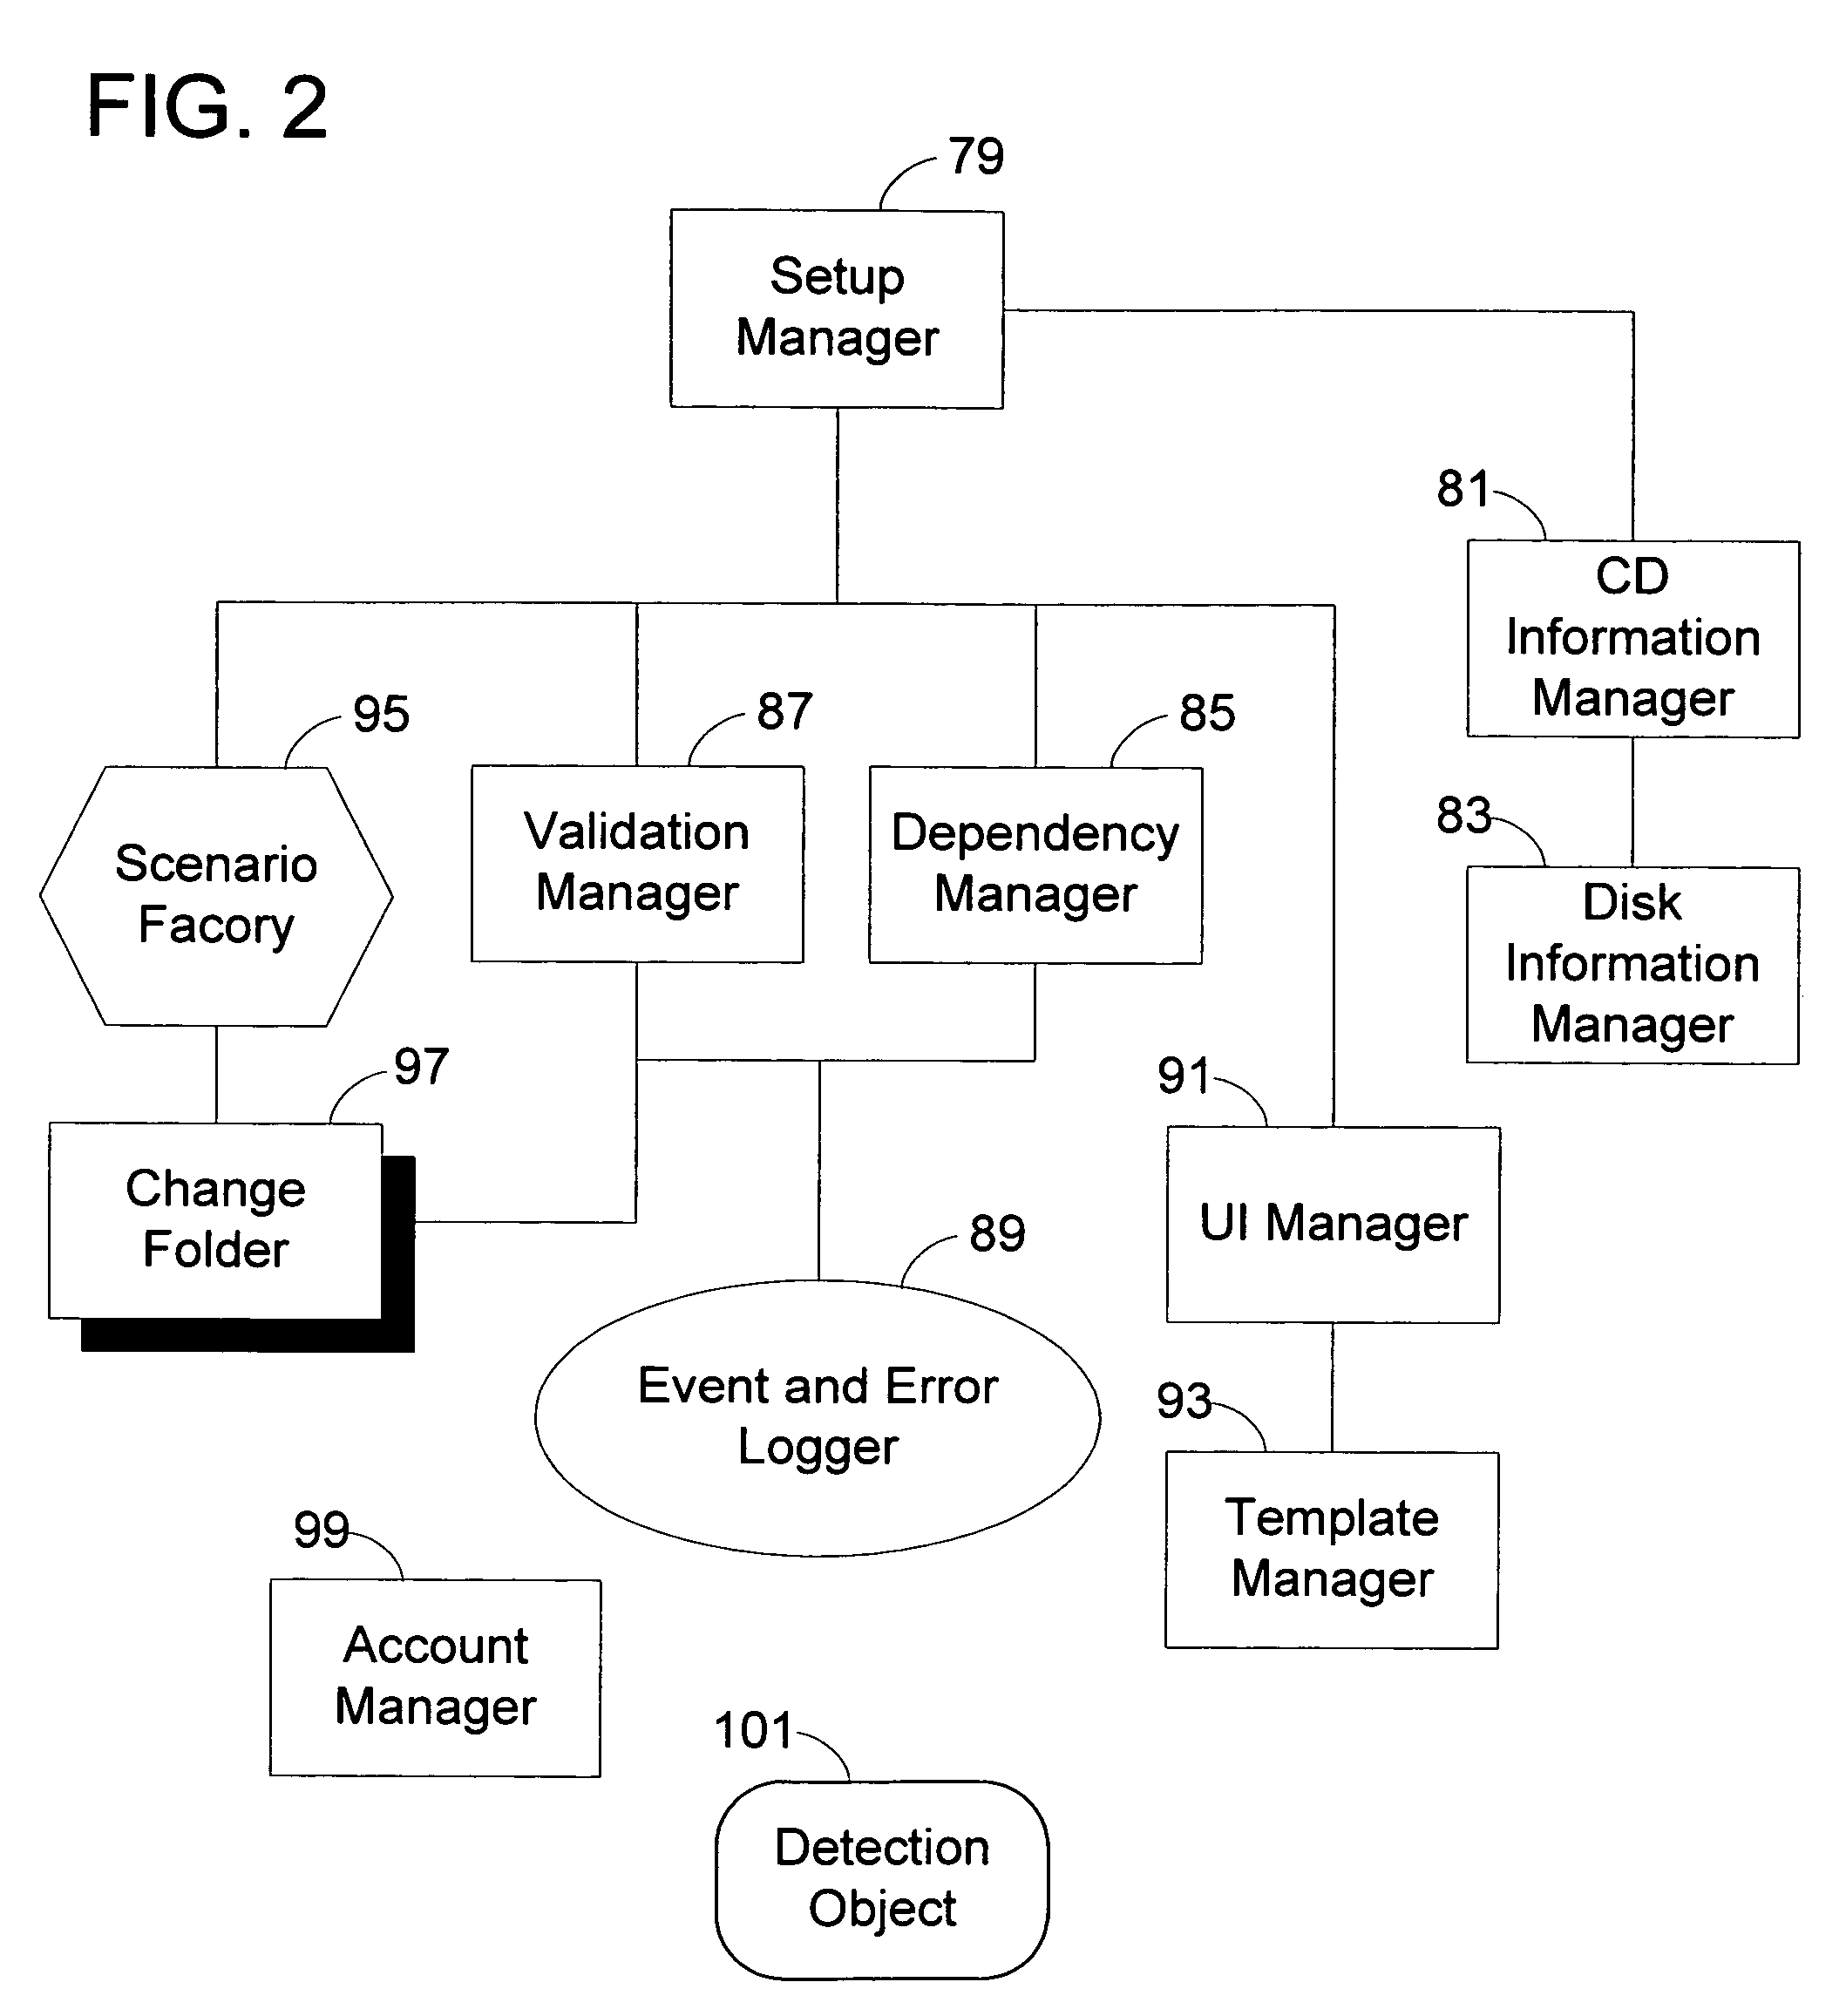 System and method of providing multiple installation actions